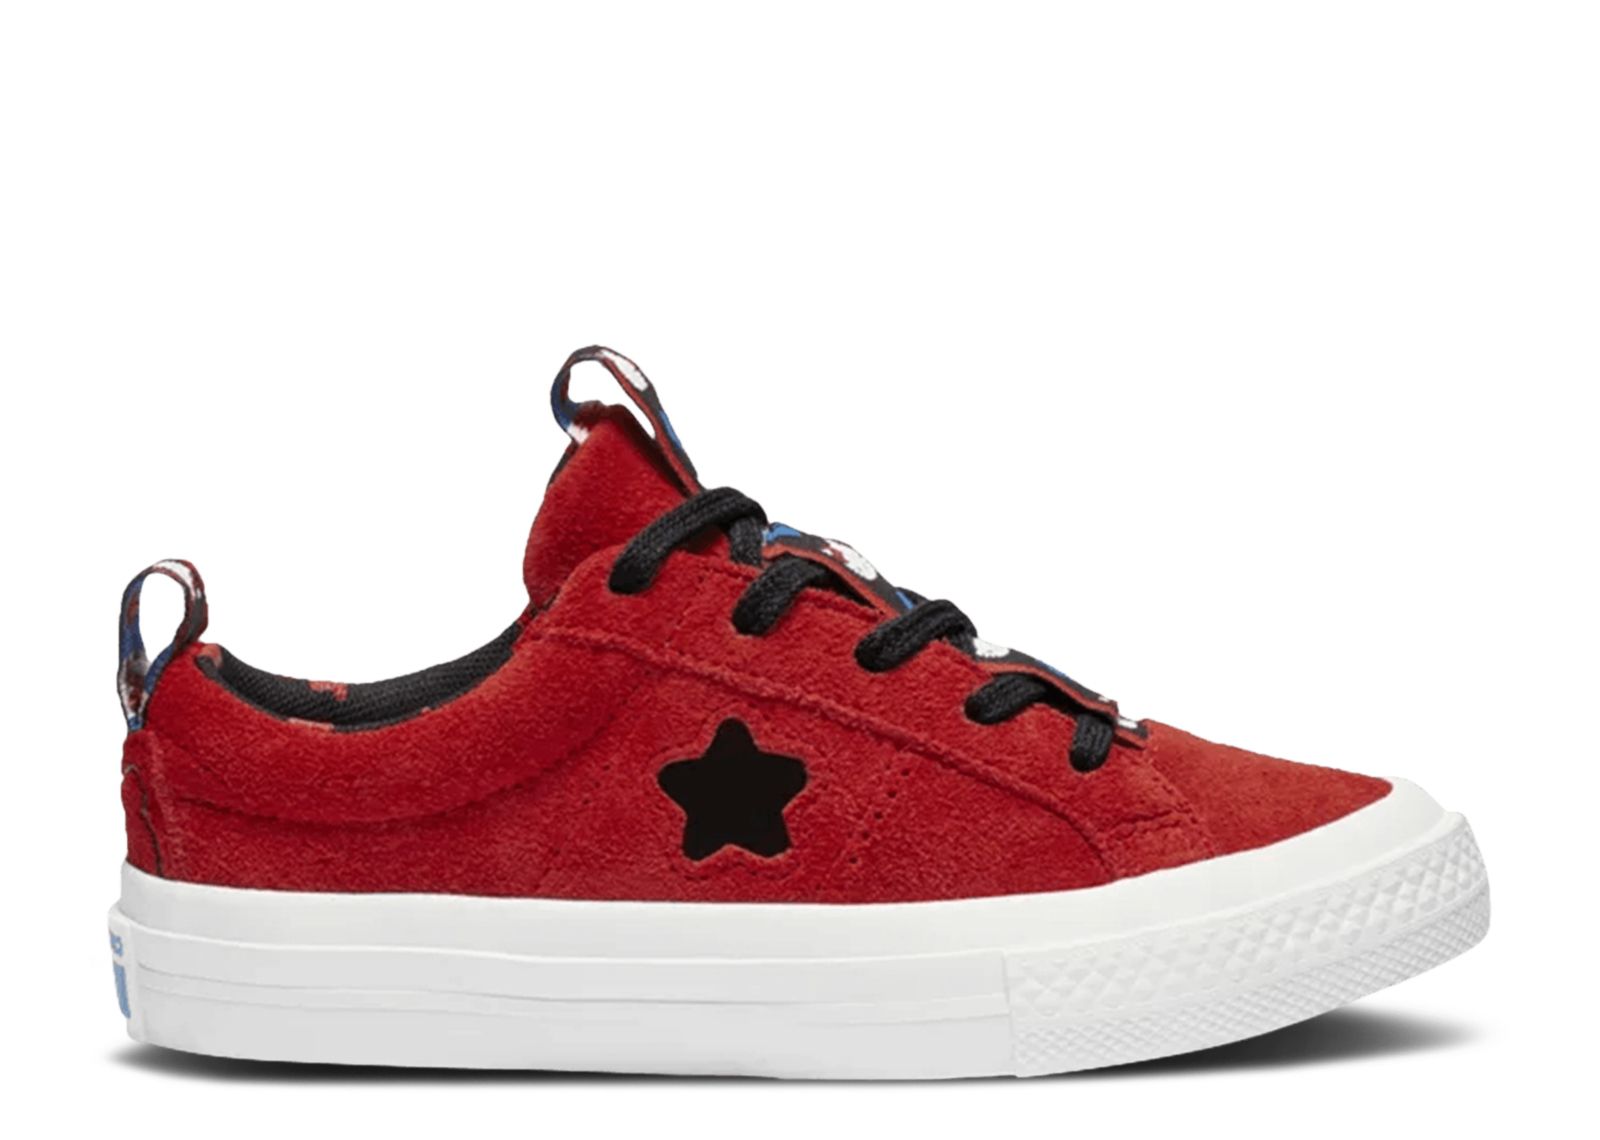 Кроссовки Converse Hello Kitty X One Star Low Top Gs 'Red', красный кеды converse one star pro suede low